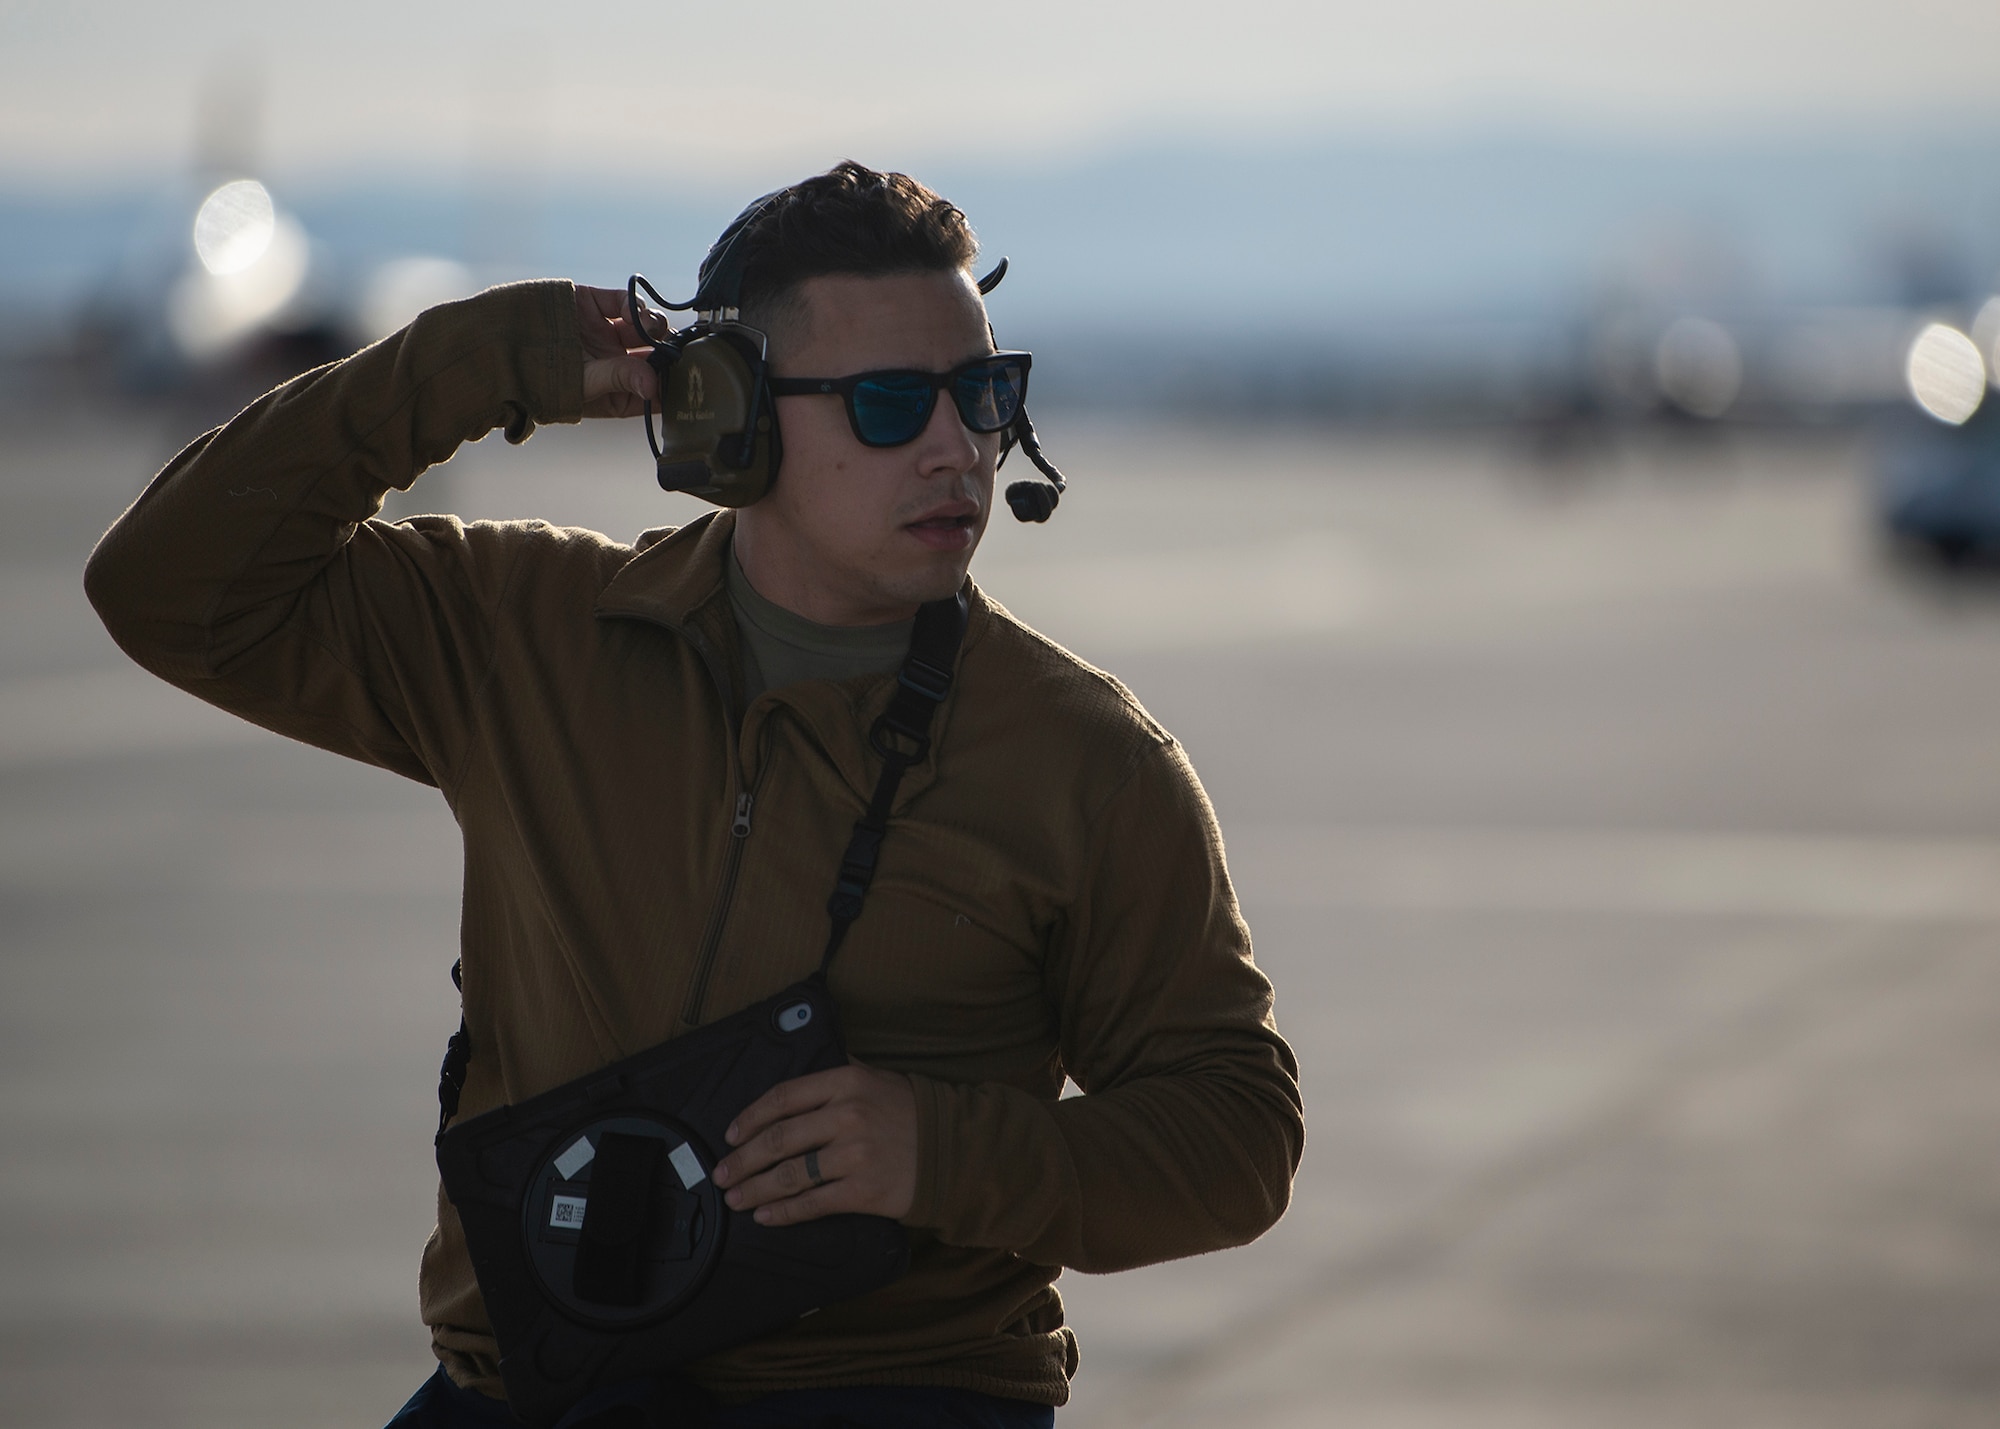 An Airman adjusts his headset while holding a tablet.